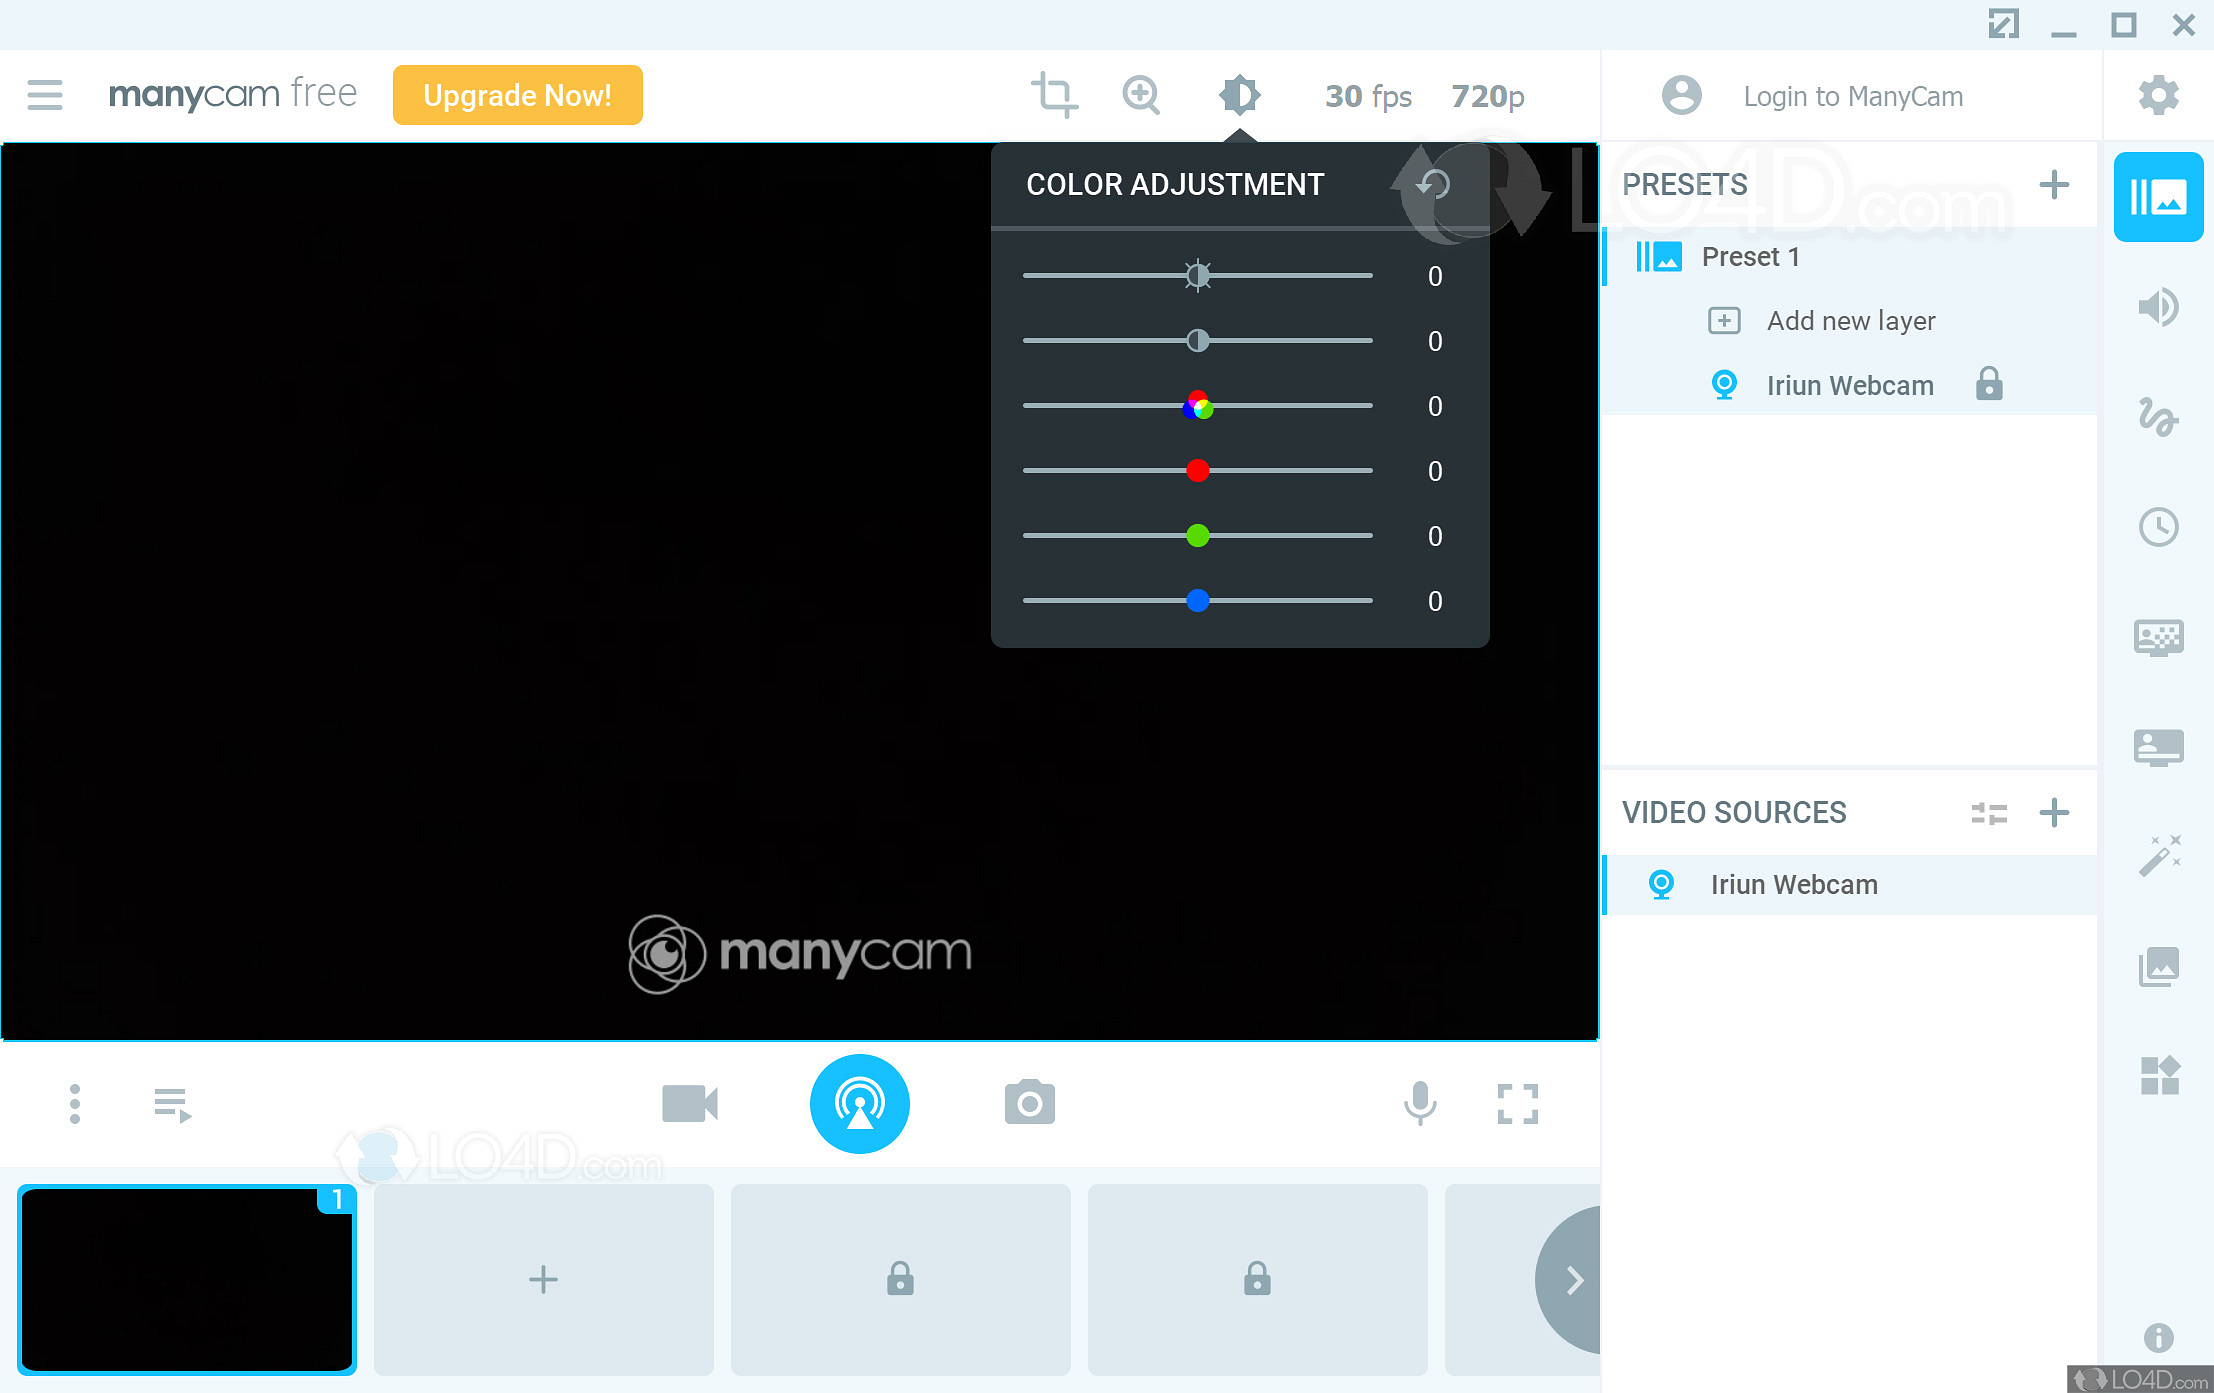 Download manycam 4.0.52 free